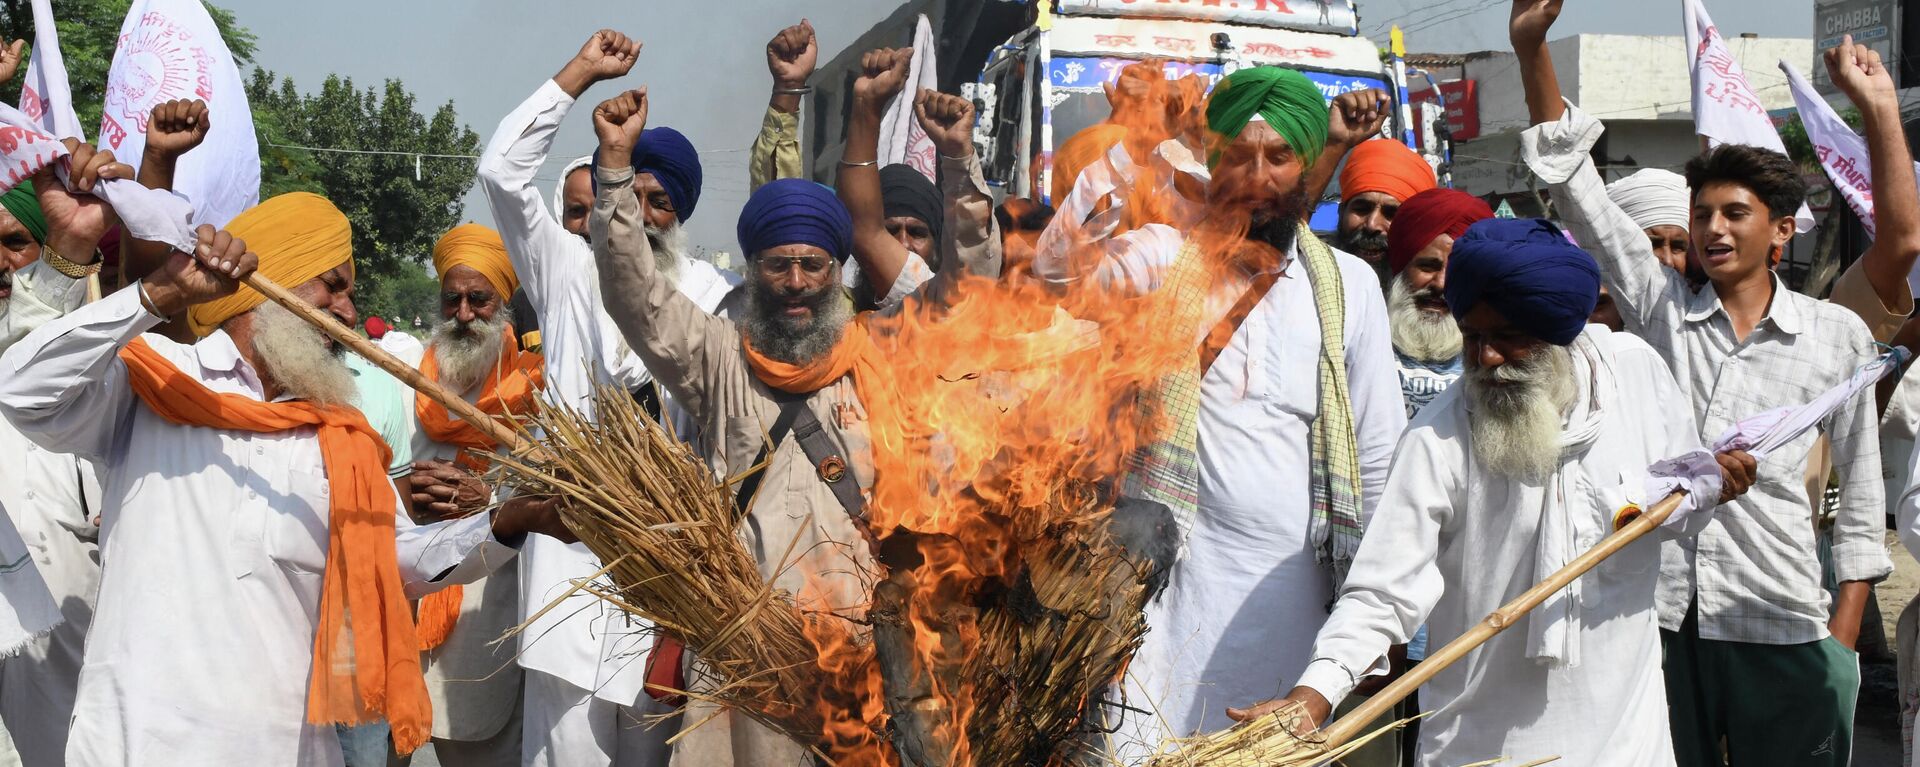 Farmers shout slogans as they burn an effigy of India's Prime Minister Narendra Modi and Uttar Pradesh state Chief Minister Yogi Adityanath during a protest on the outskirts of Amritsar on October 6, 2021, days after 9 people died in violent clashes during a farmers protest in Lakhimpur Kheri district in Utta Pradesh - Sputnik International, 1920, 06.10.2021